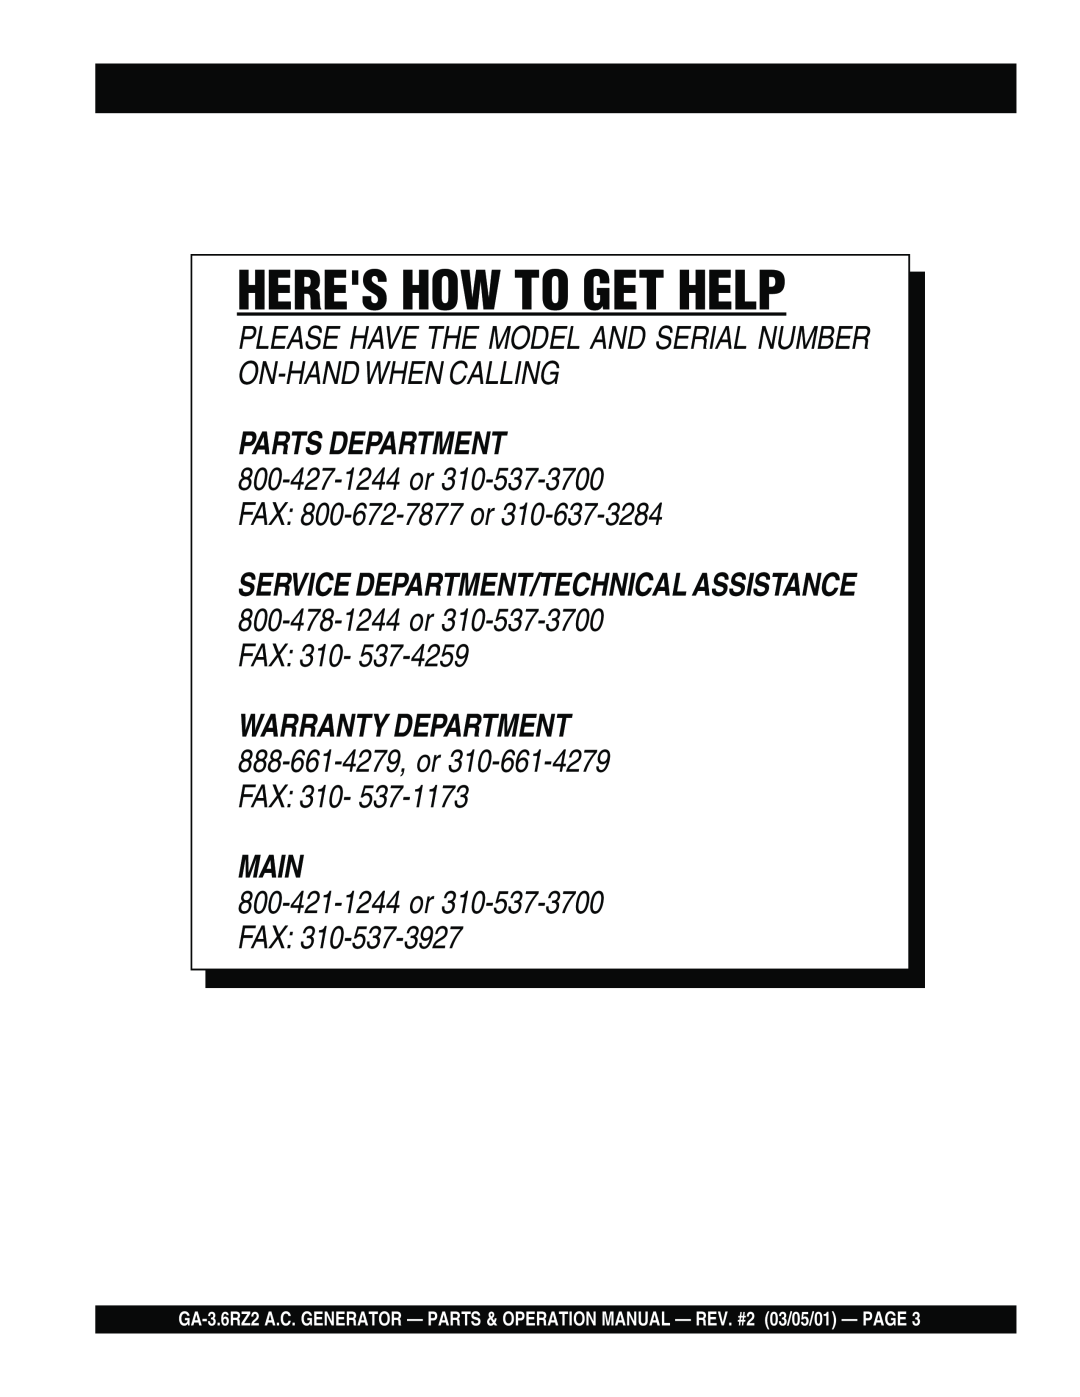 Multiquip GA-3.6RZ2 Heres How To Get Help, Parts Department, FAX: 310, Main, 800-421-1244or 310-537-3700FAX 